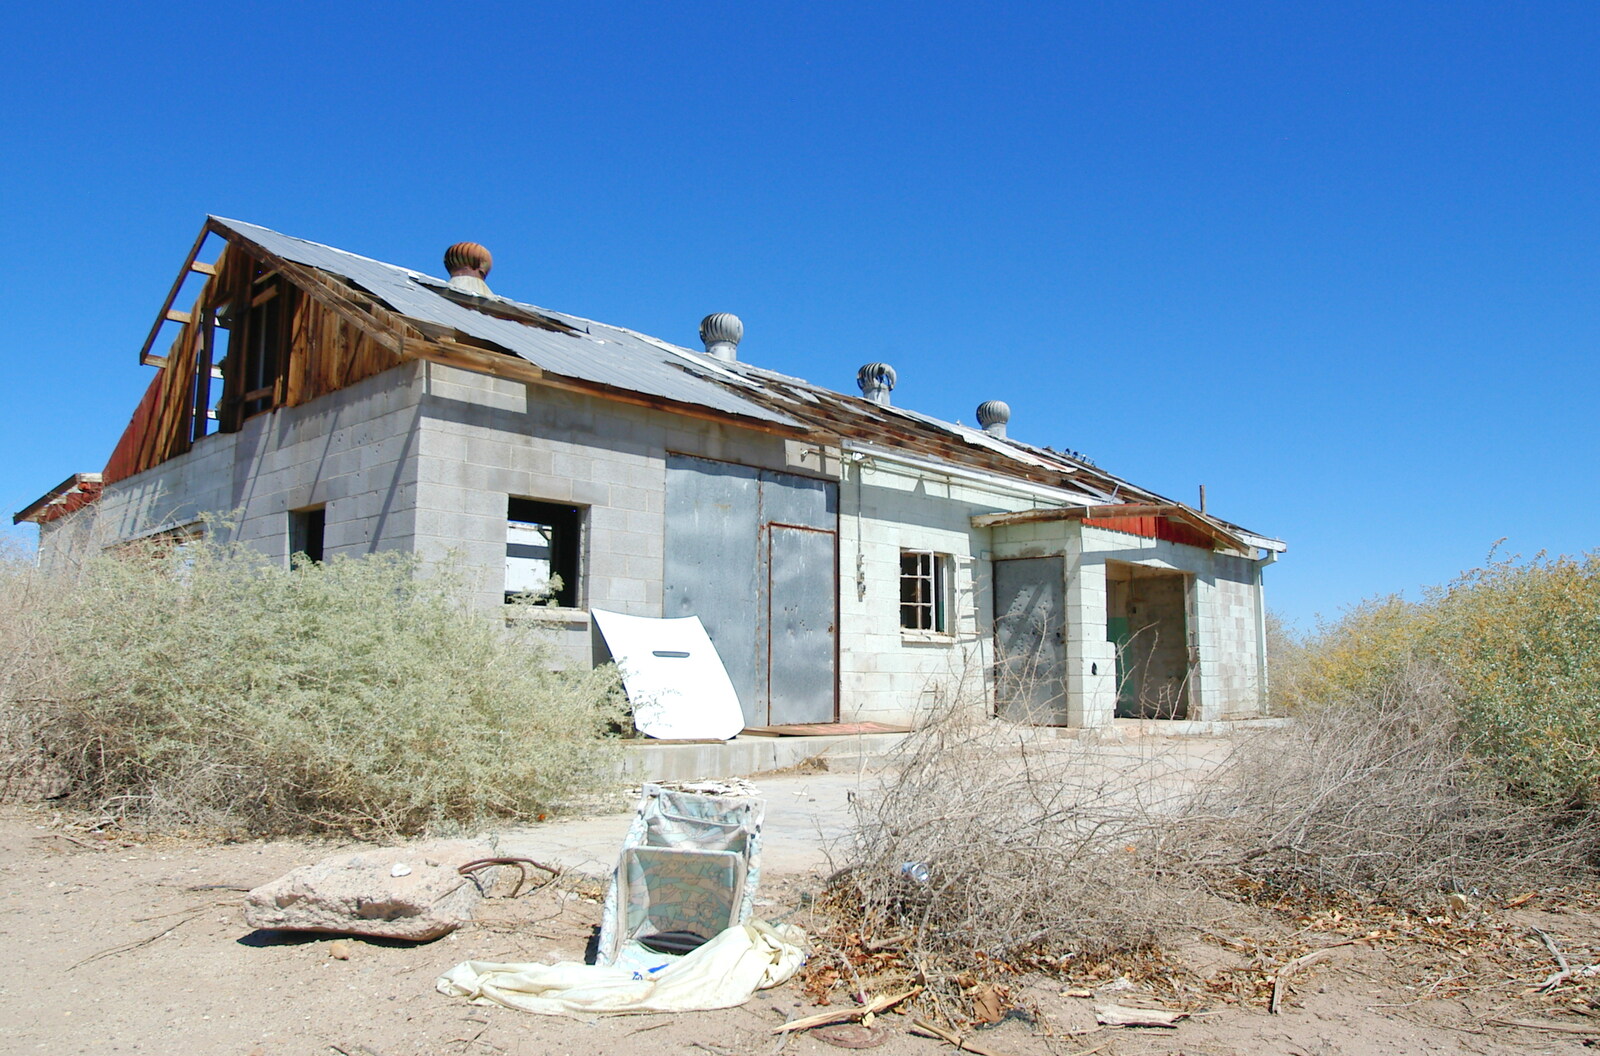 The abandoned dairy from California Desert: El Centro, Imperial Valley, California, US - 24th September 2005